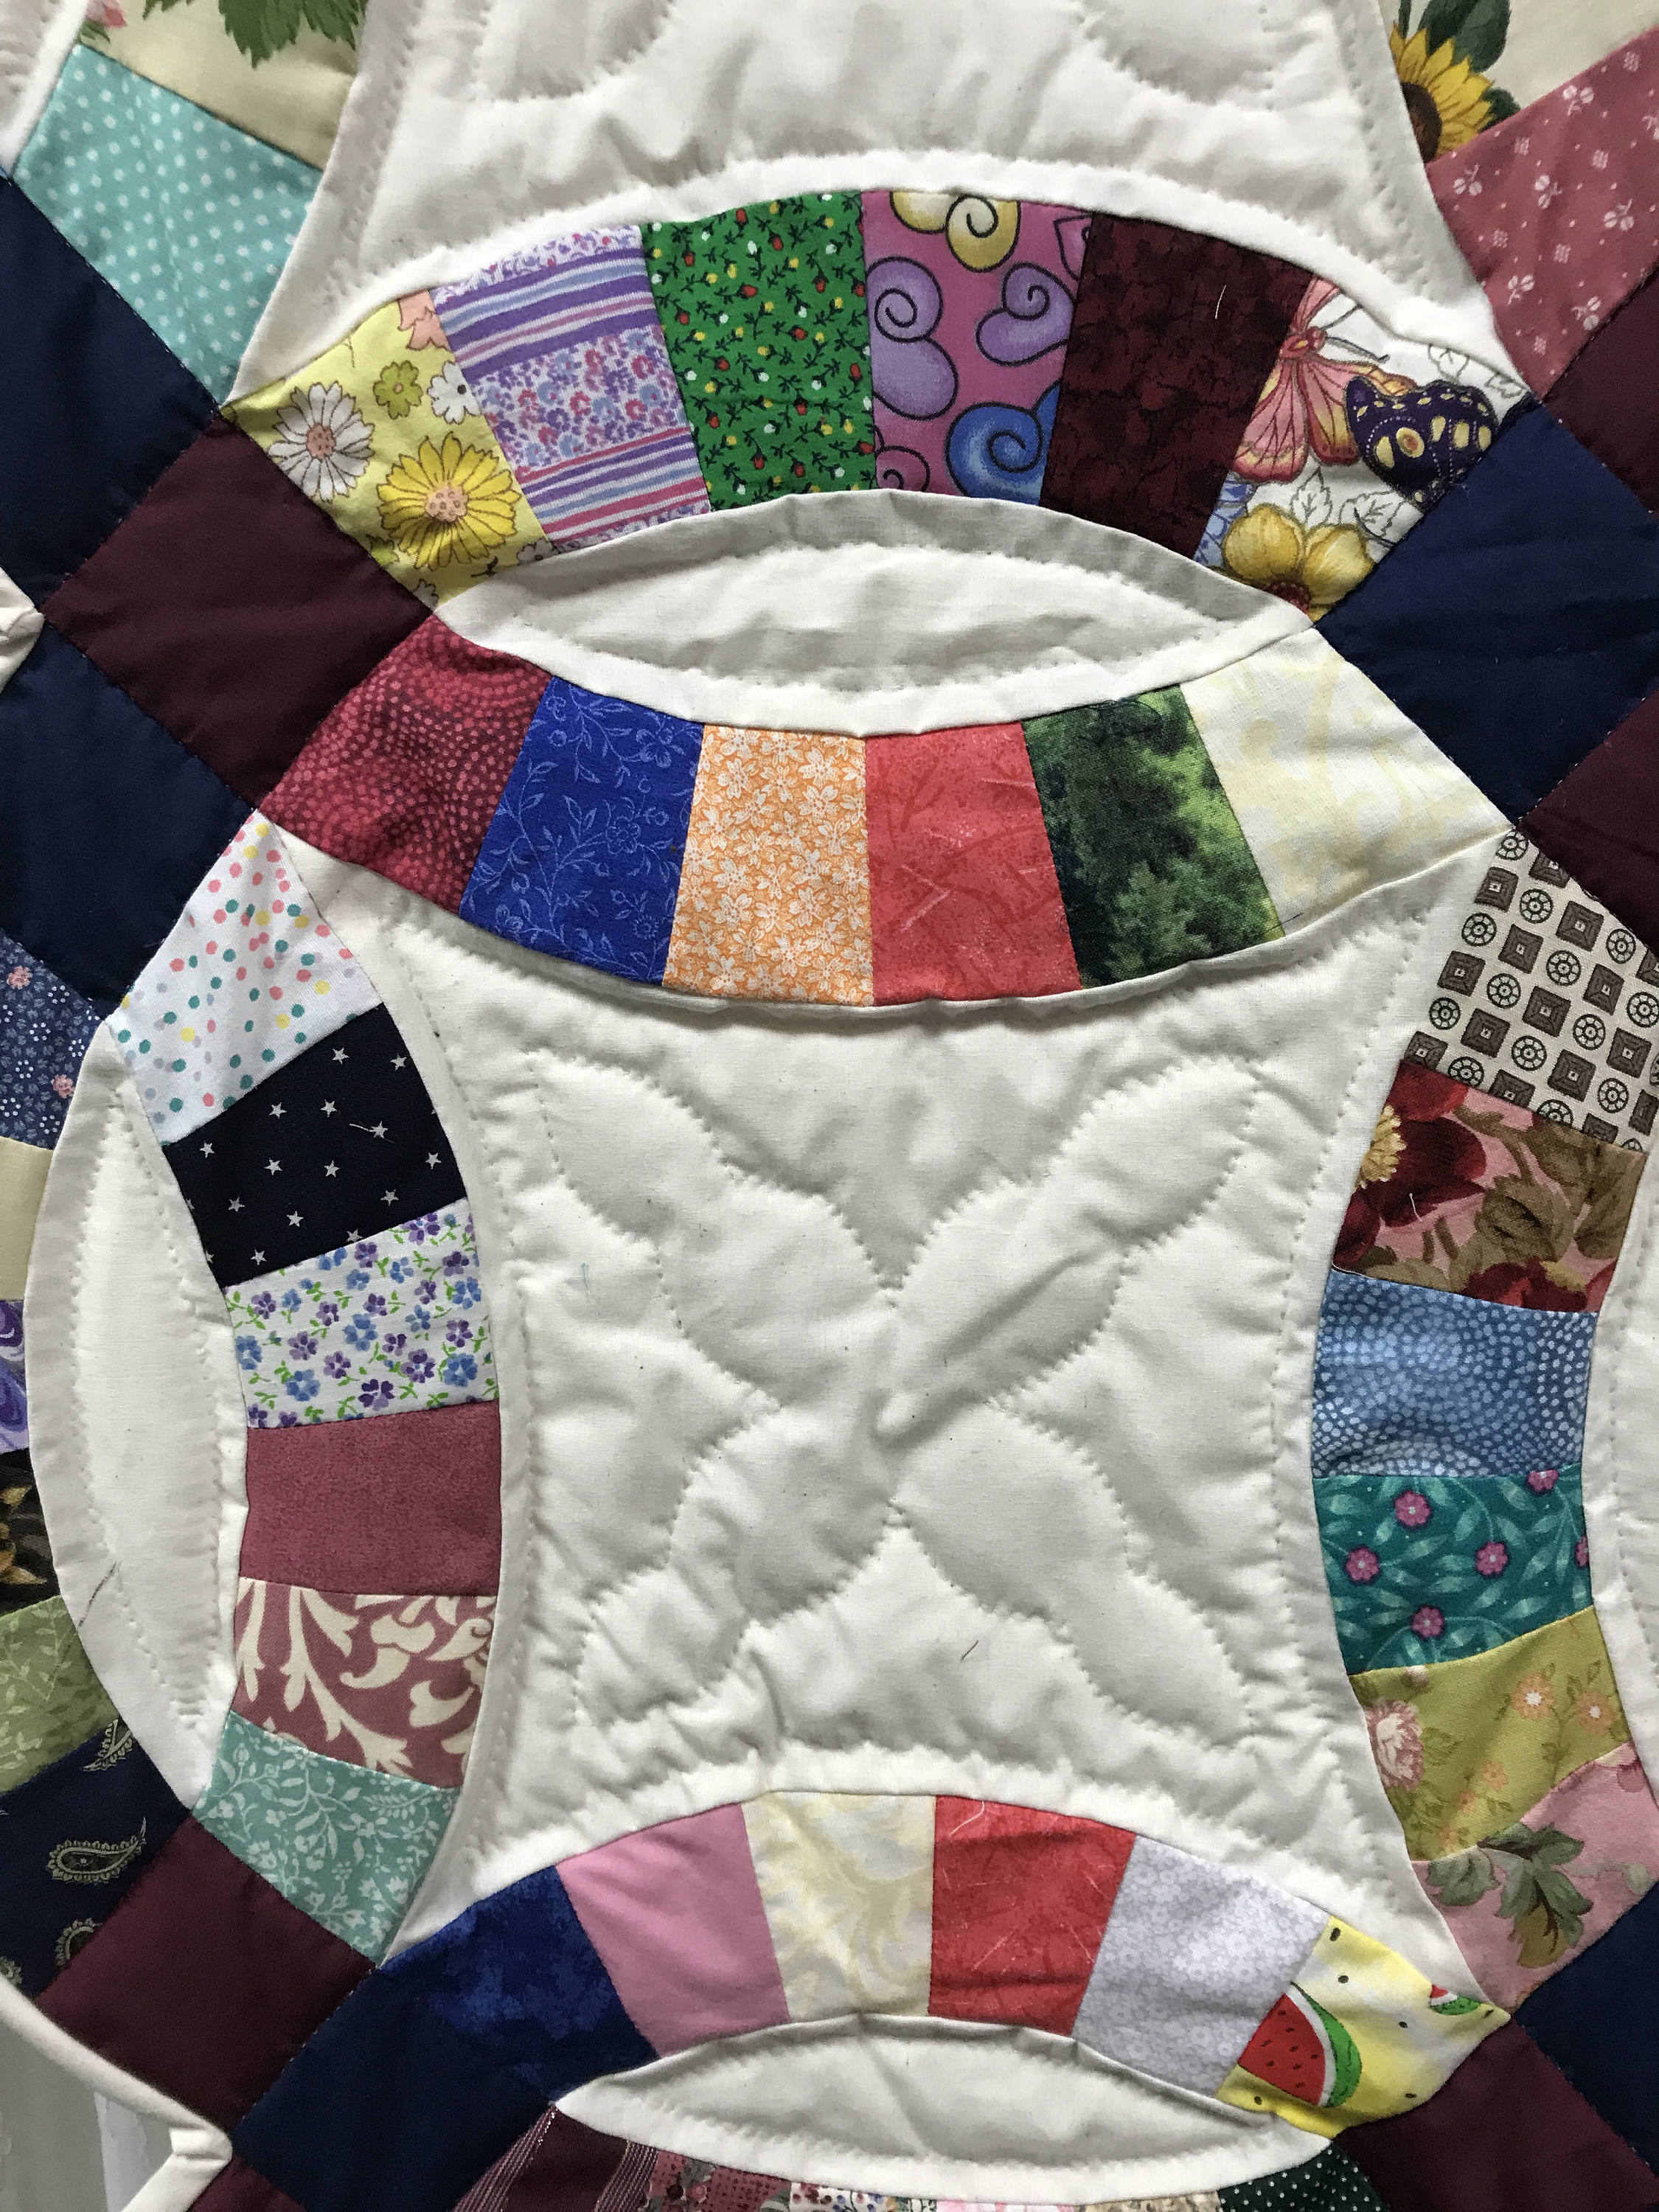 On SALE! Beautiful Double Wedding Ring Quilt Hand Quilted Handmade